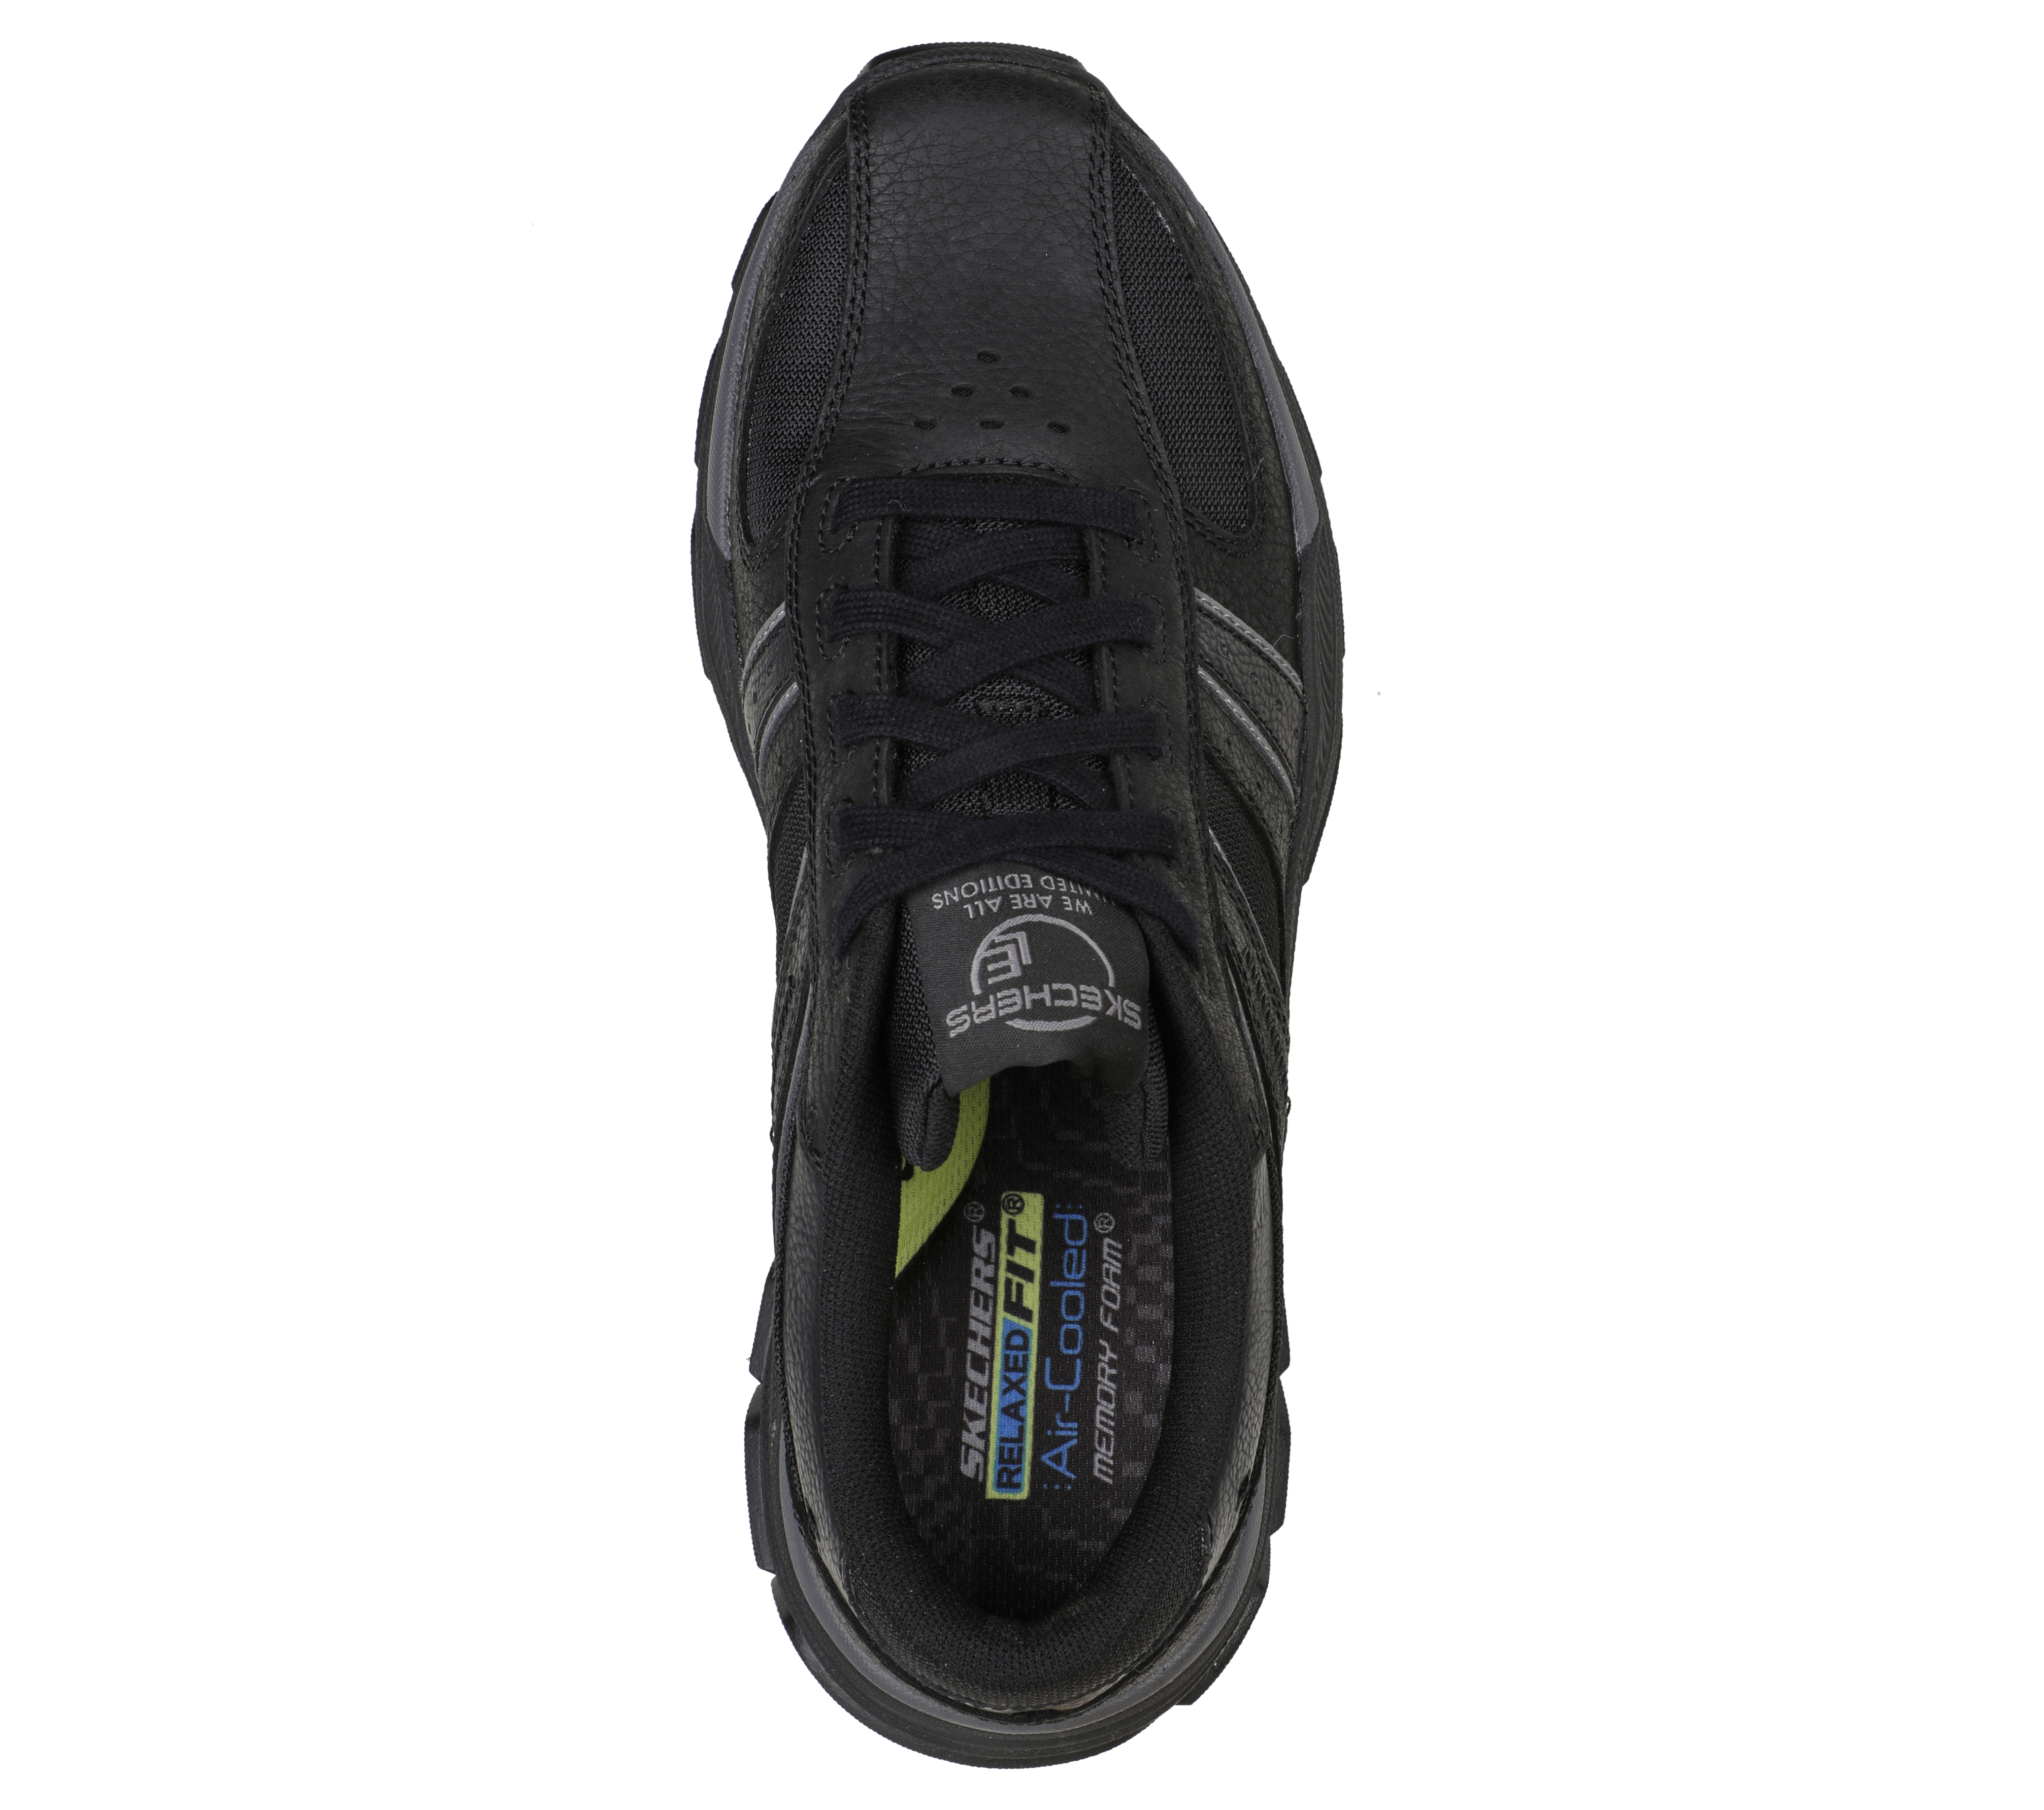 Tumor maligno Amplia gama hipoteca Relaxed Fit: Respected - Edgemere | SKECHERS ES